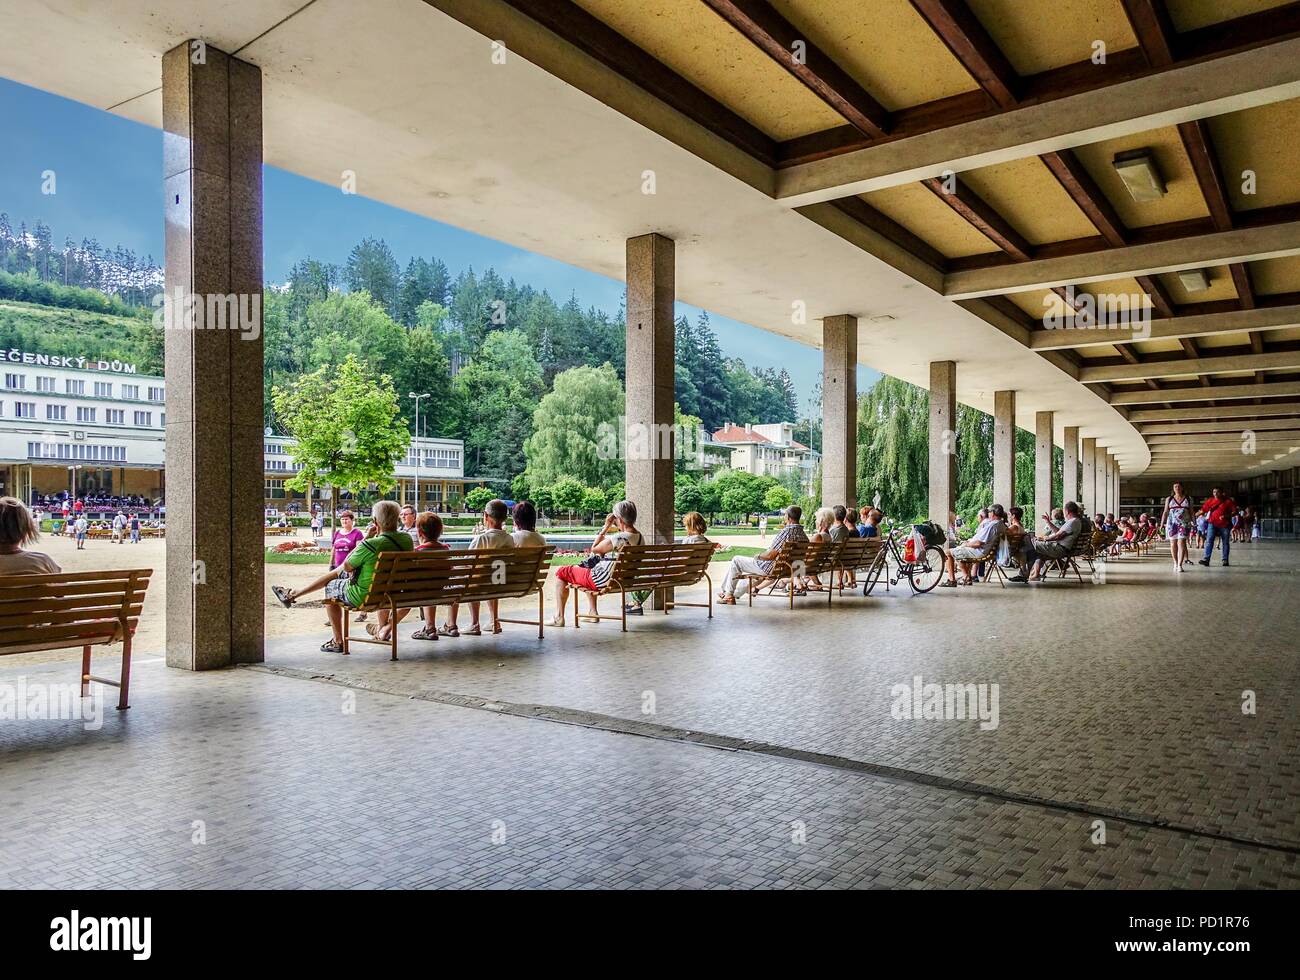 Colonnade, Luhacovice is a spa town in the Zlin Region, Moravia, Czech Republic. Stock Photo